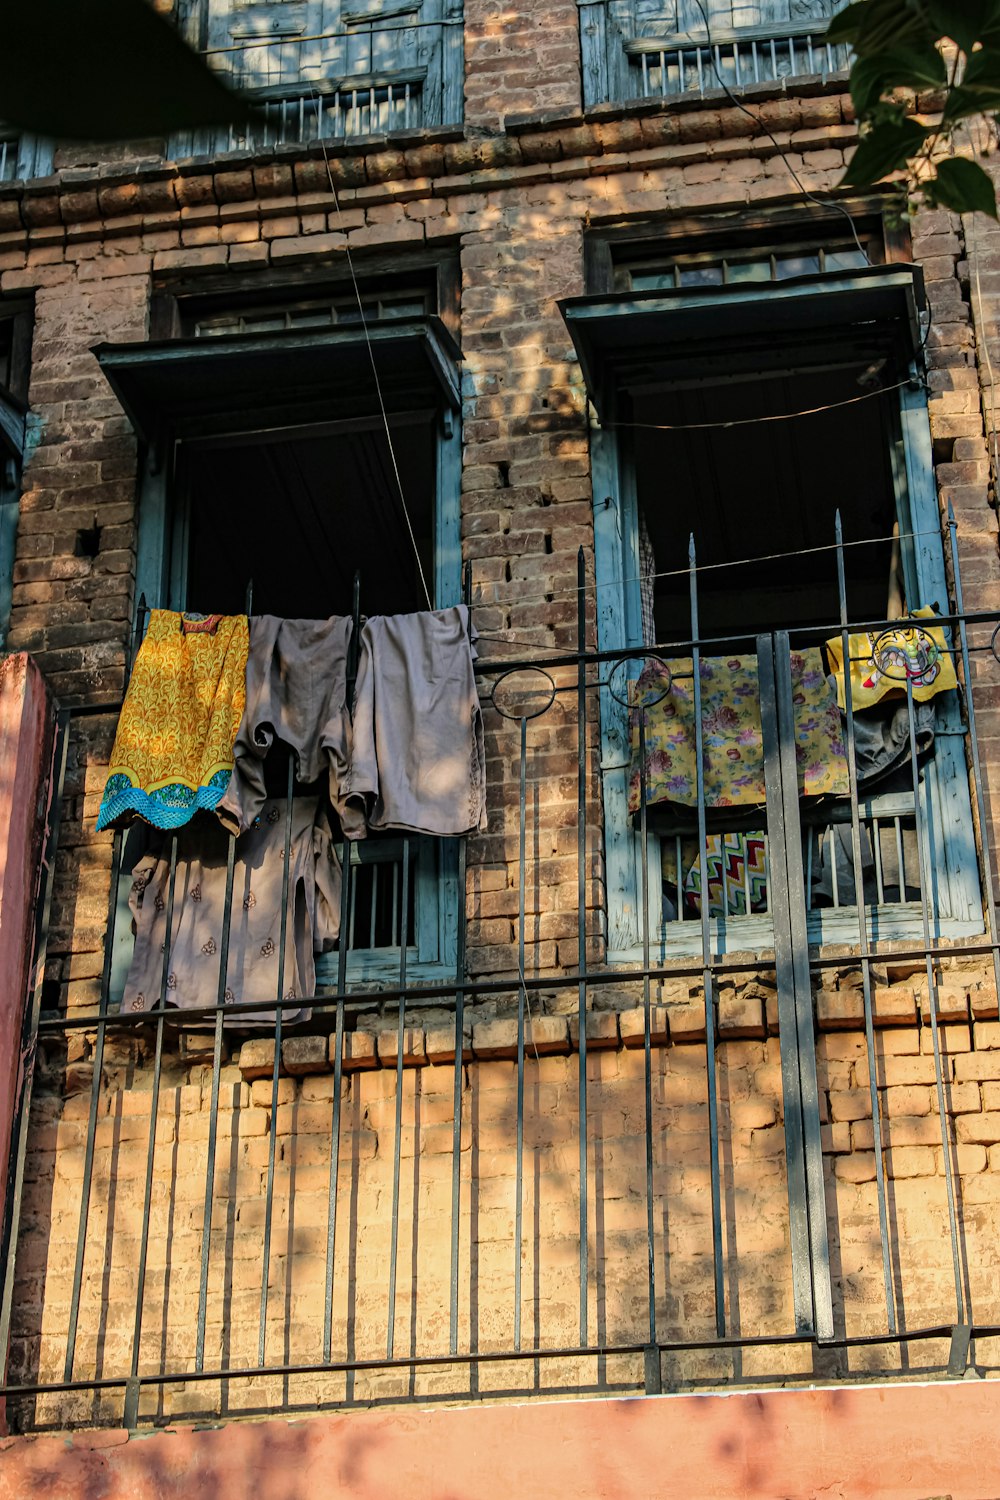 clothes hanging out to dry on a balcony